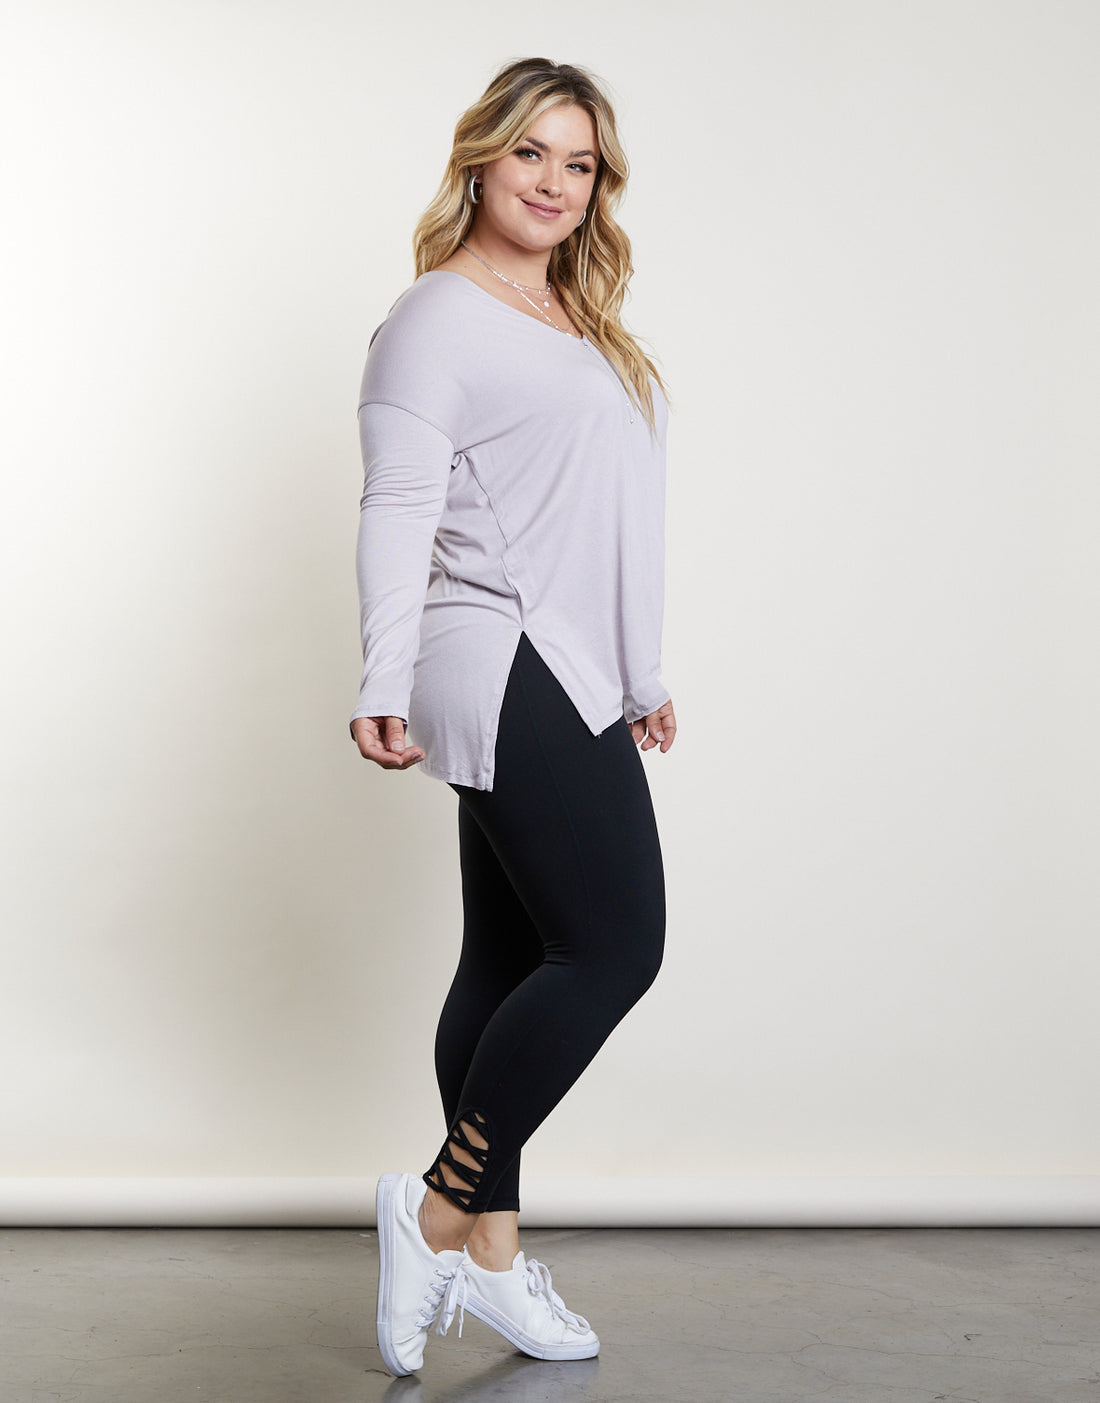 Curve Cozy Long Sleeve Tee Plus Size Tops -2020AVE